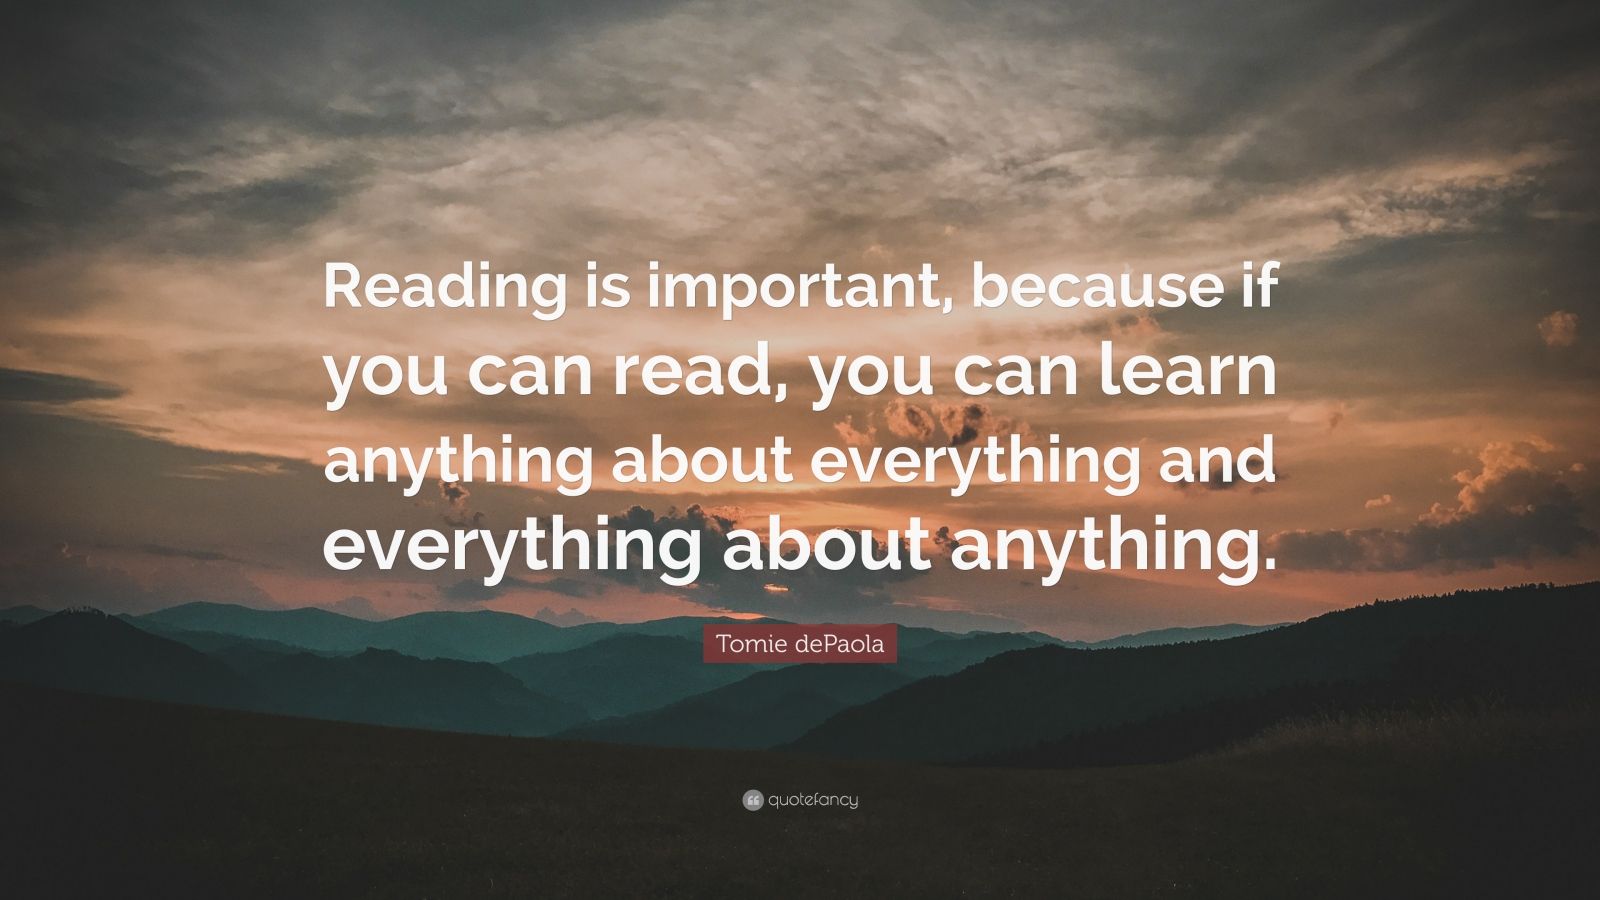 Tomie dePaola Quote “Reading is important, because if you